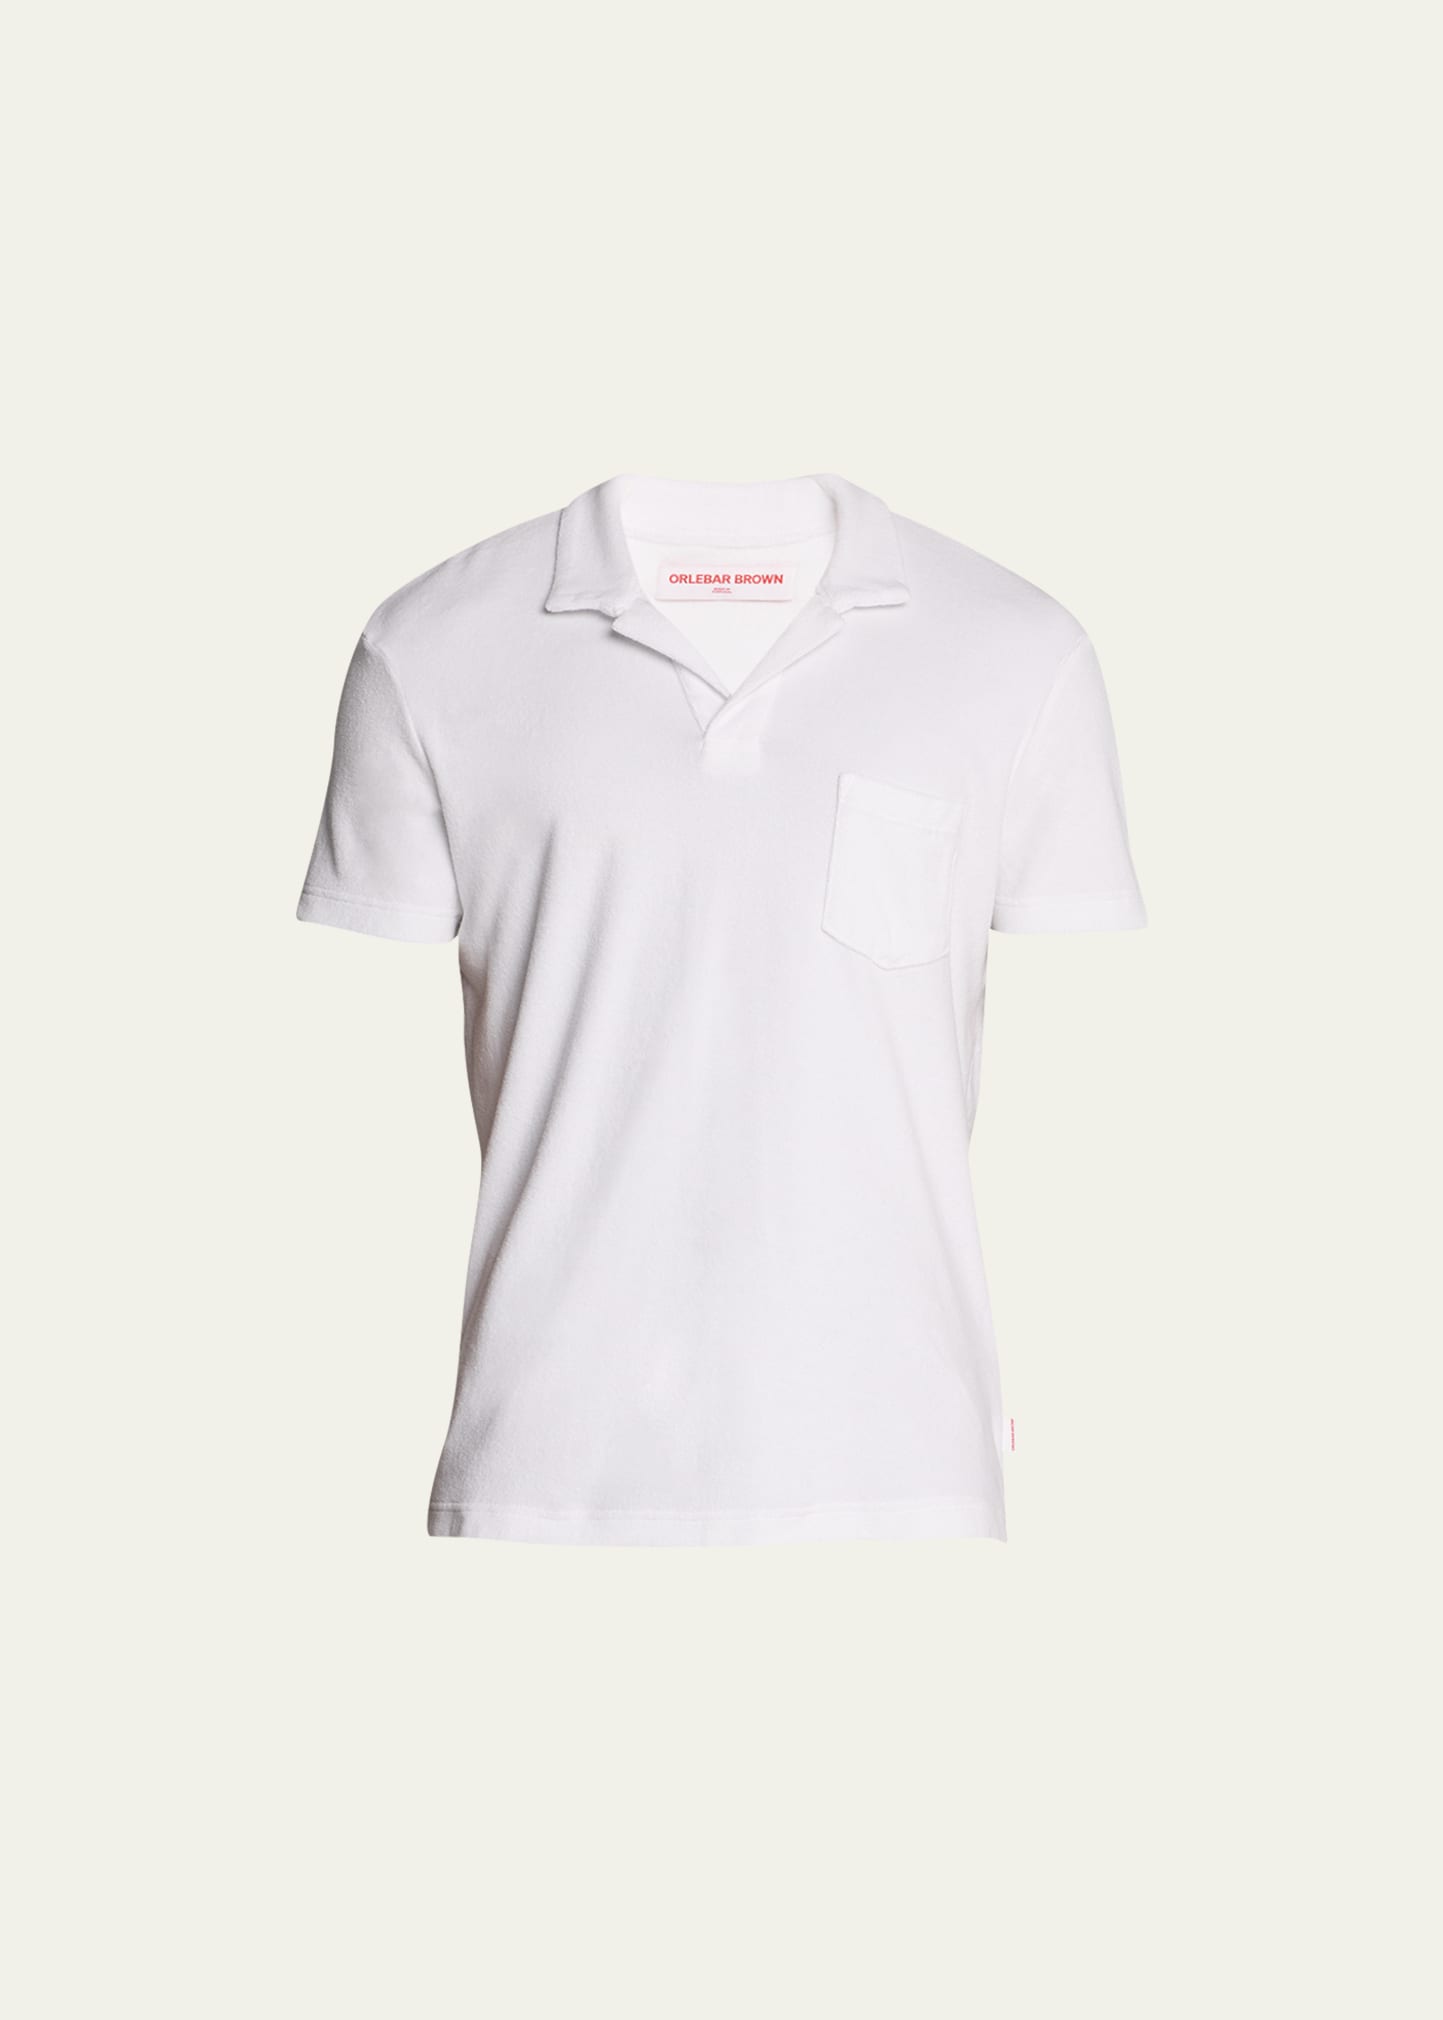 Orlebar Brown Terry Towelling Resort Polo Shirt In White